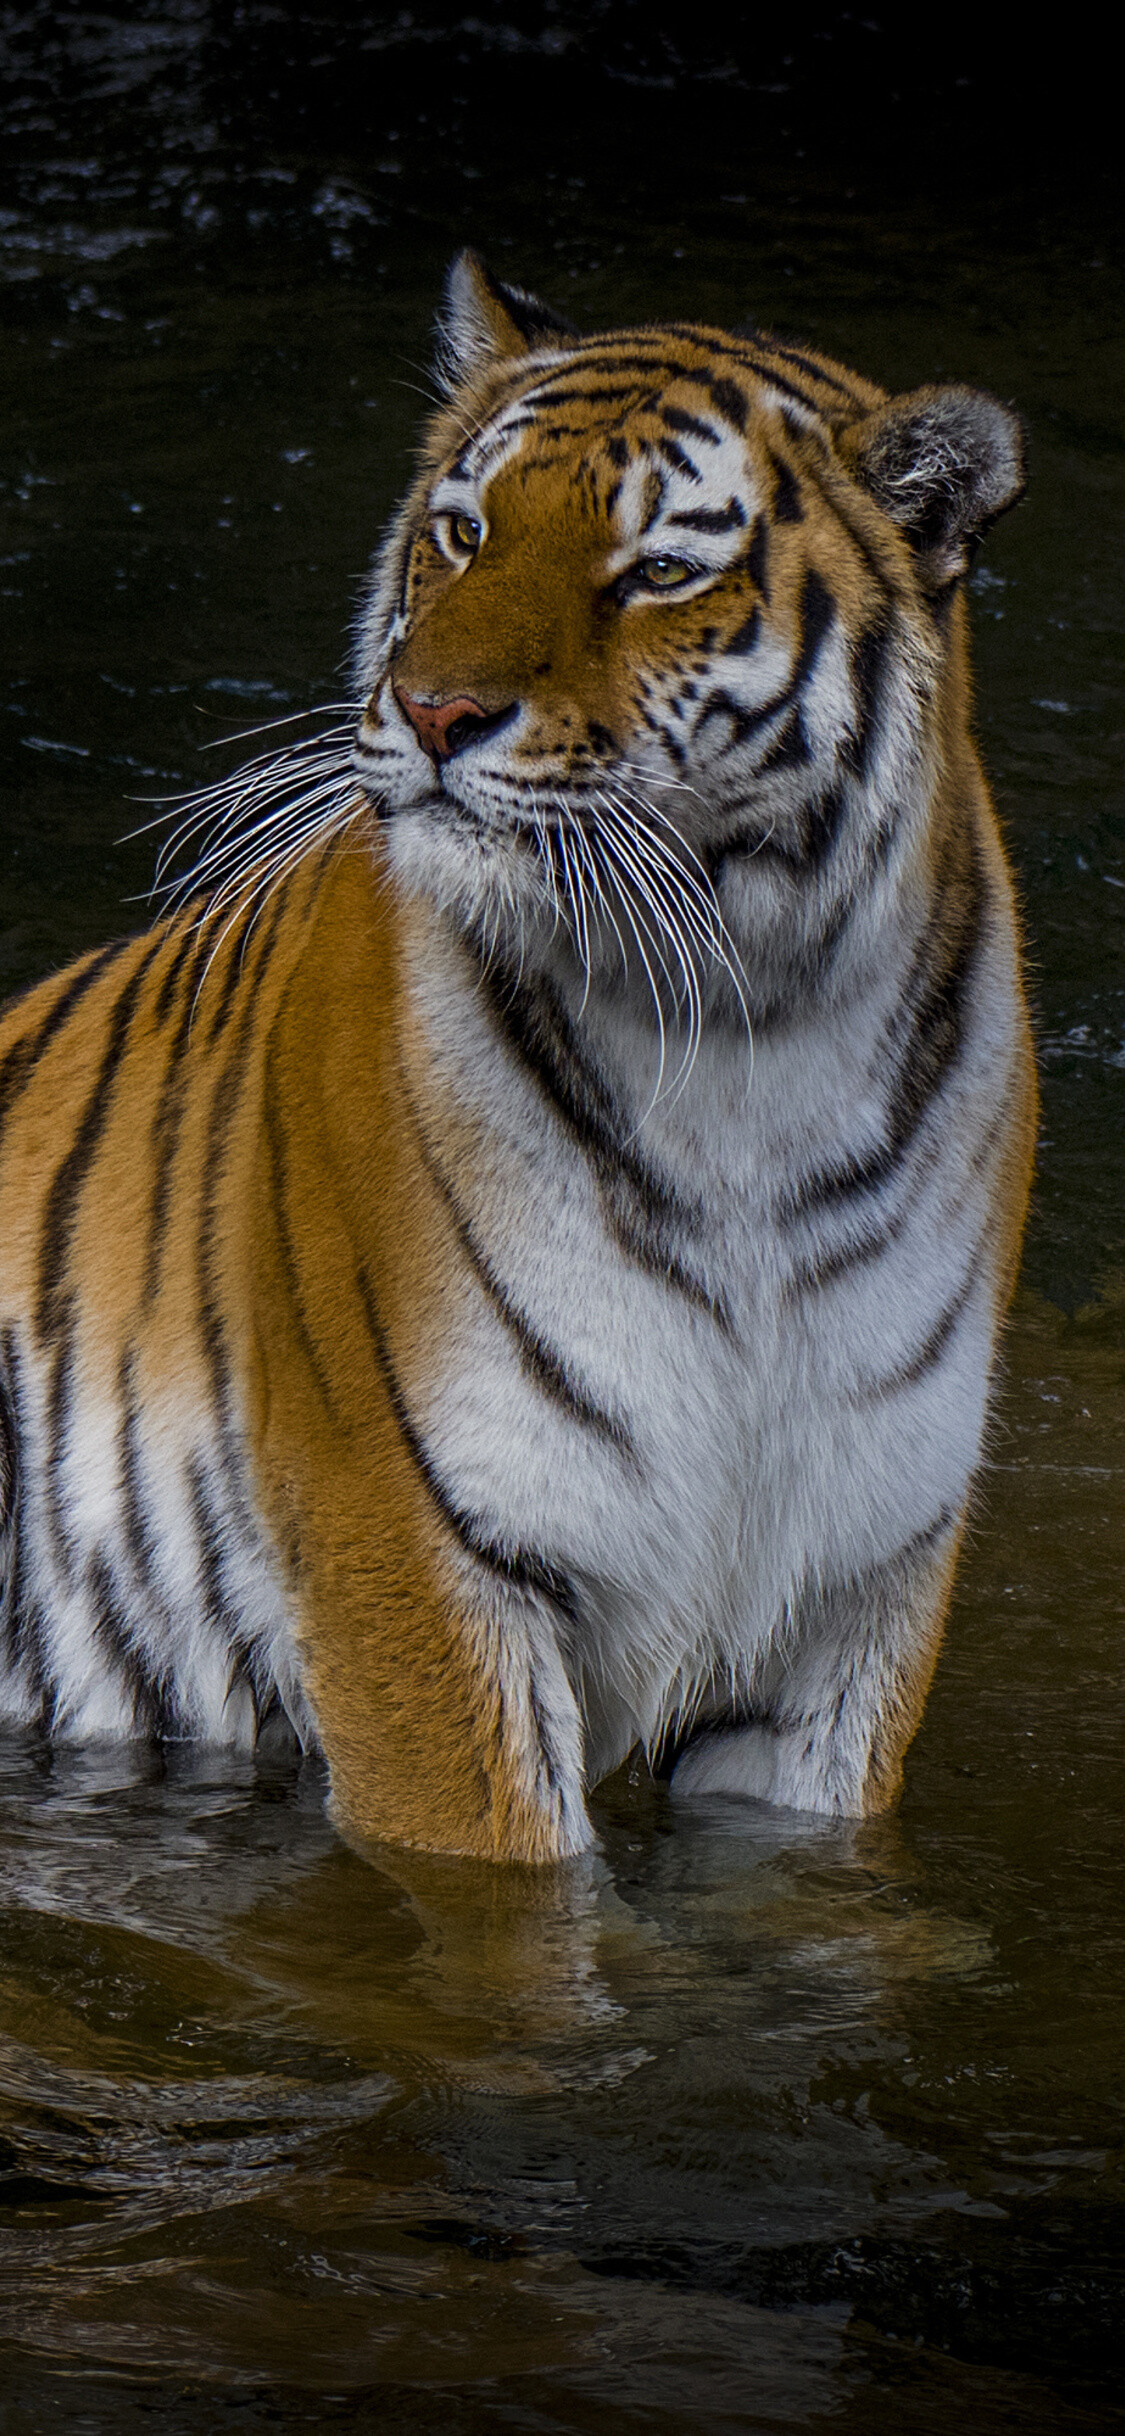 Tiger: Sumatran tigers are found only on the Indonesian island of Sumatra. 1130x2440 HD Wallpaper.